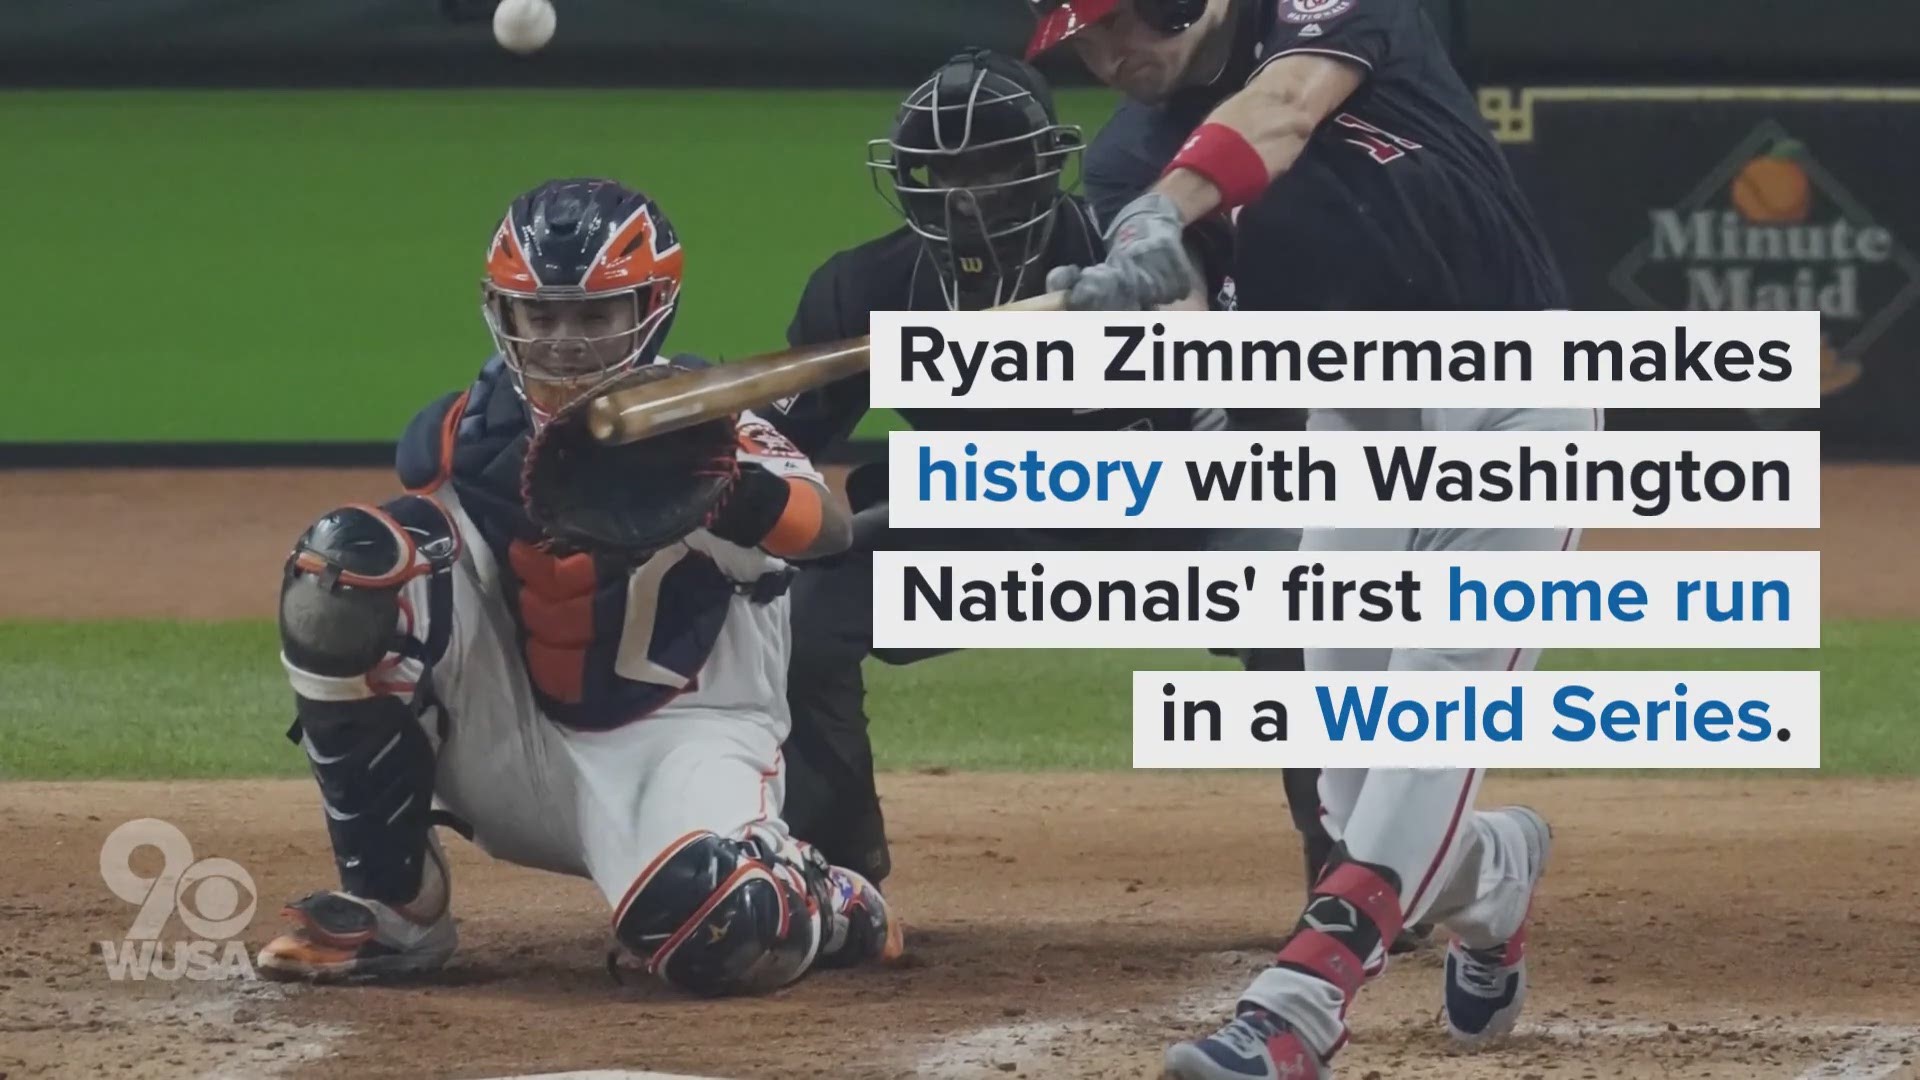 Zimmerman is  the oldest player in baseball history to hit a home run in his first World Series game.